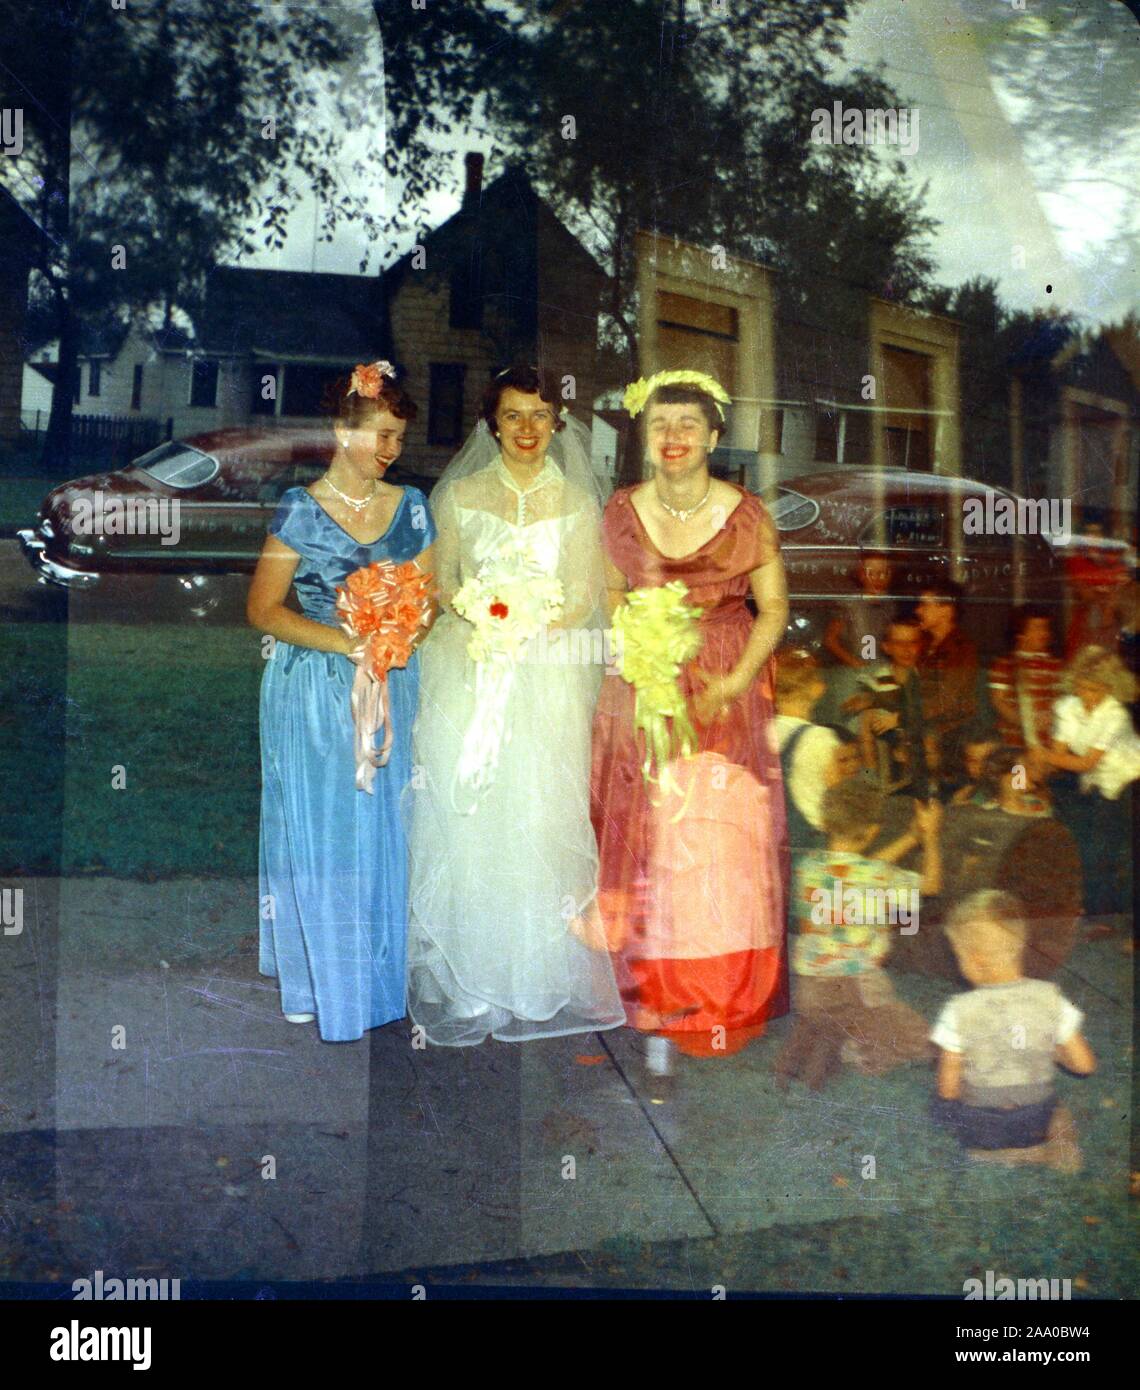 Vintage example of a photographic triple exposure, where a negative is accidentally exposed three times, showing a wedding party with bride and two bridesmaids, a church, and children playing indoors during a party, 1955. () Stock Photo